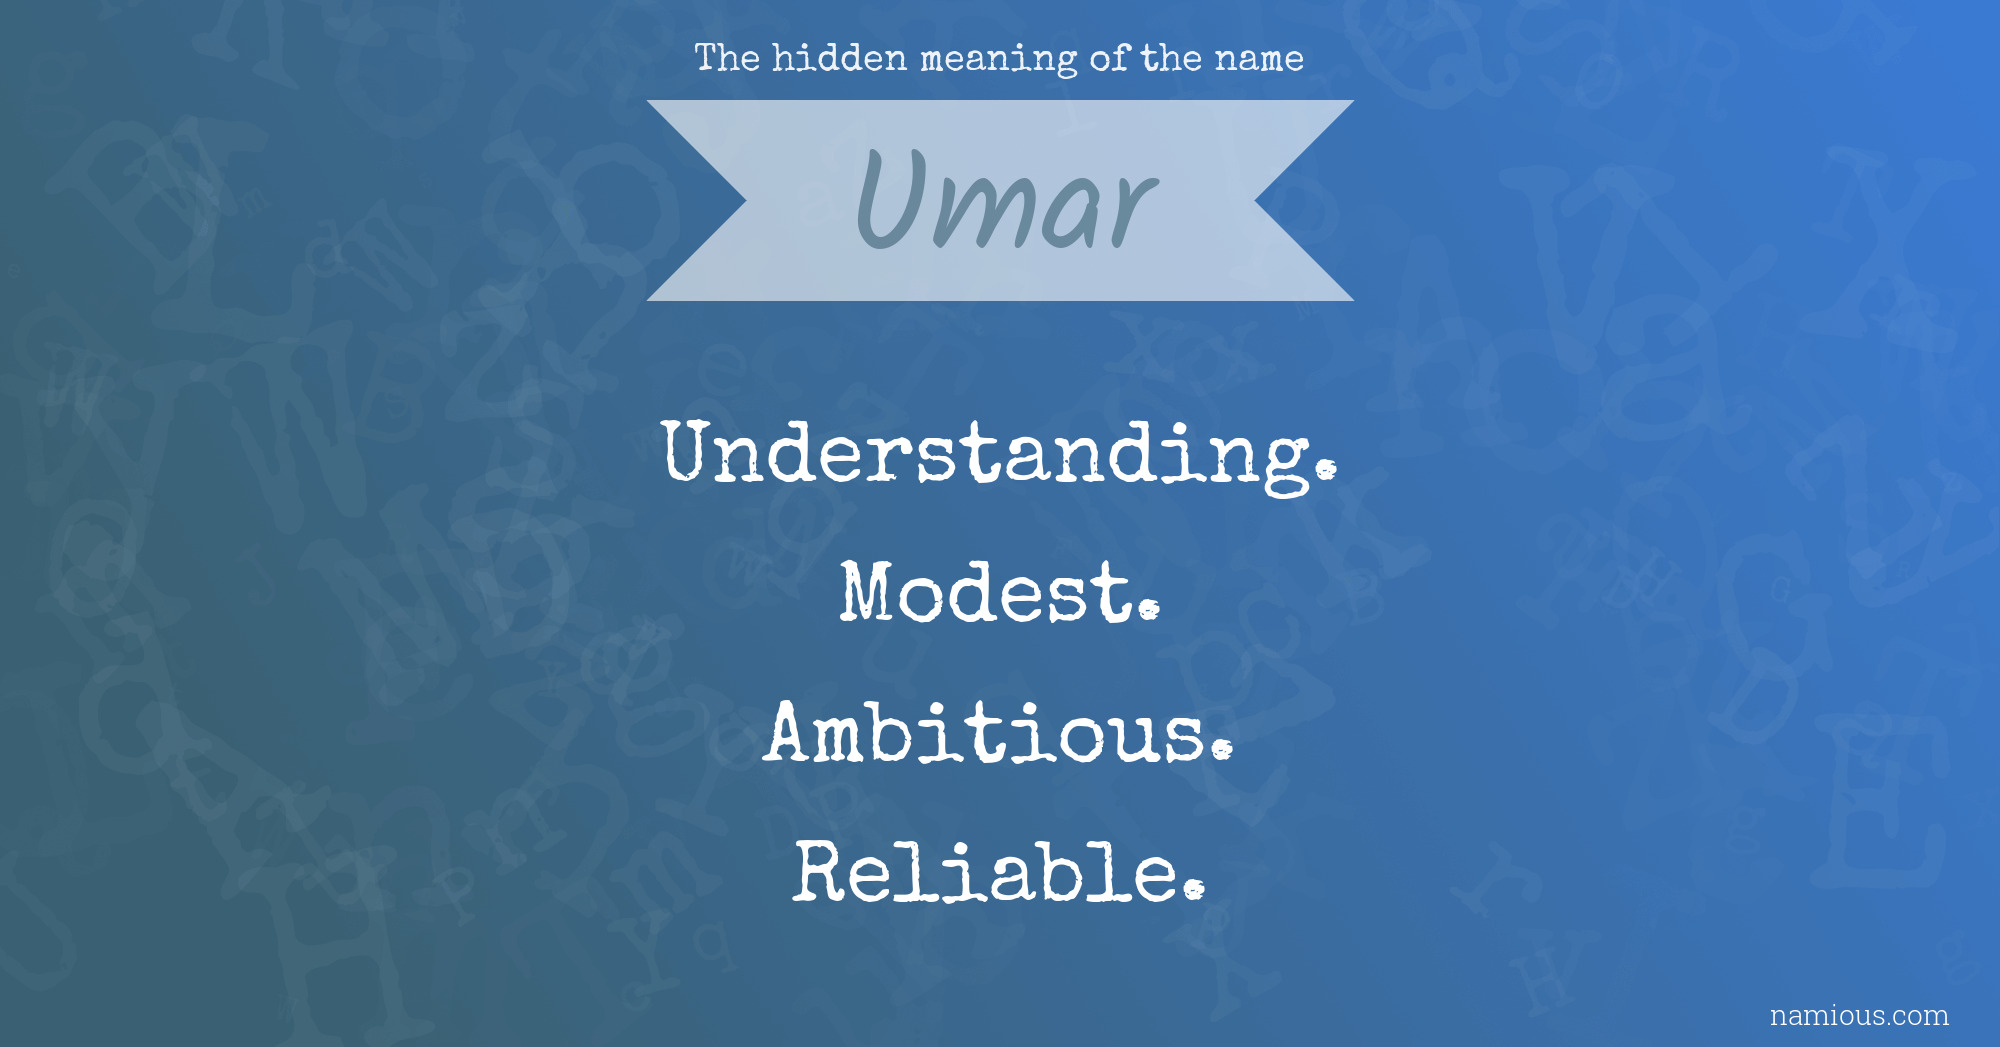 The hidden meaning of the name Umar